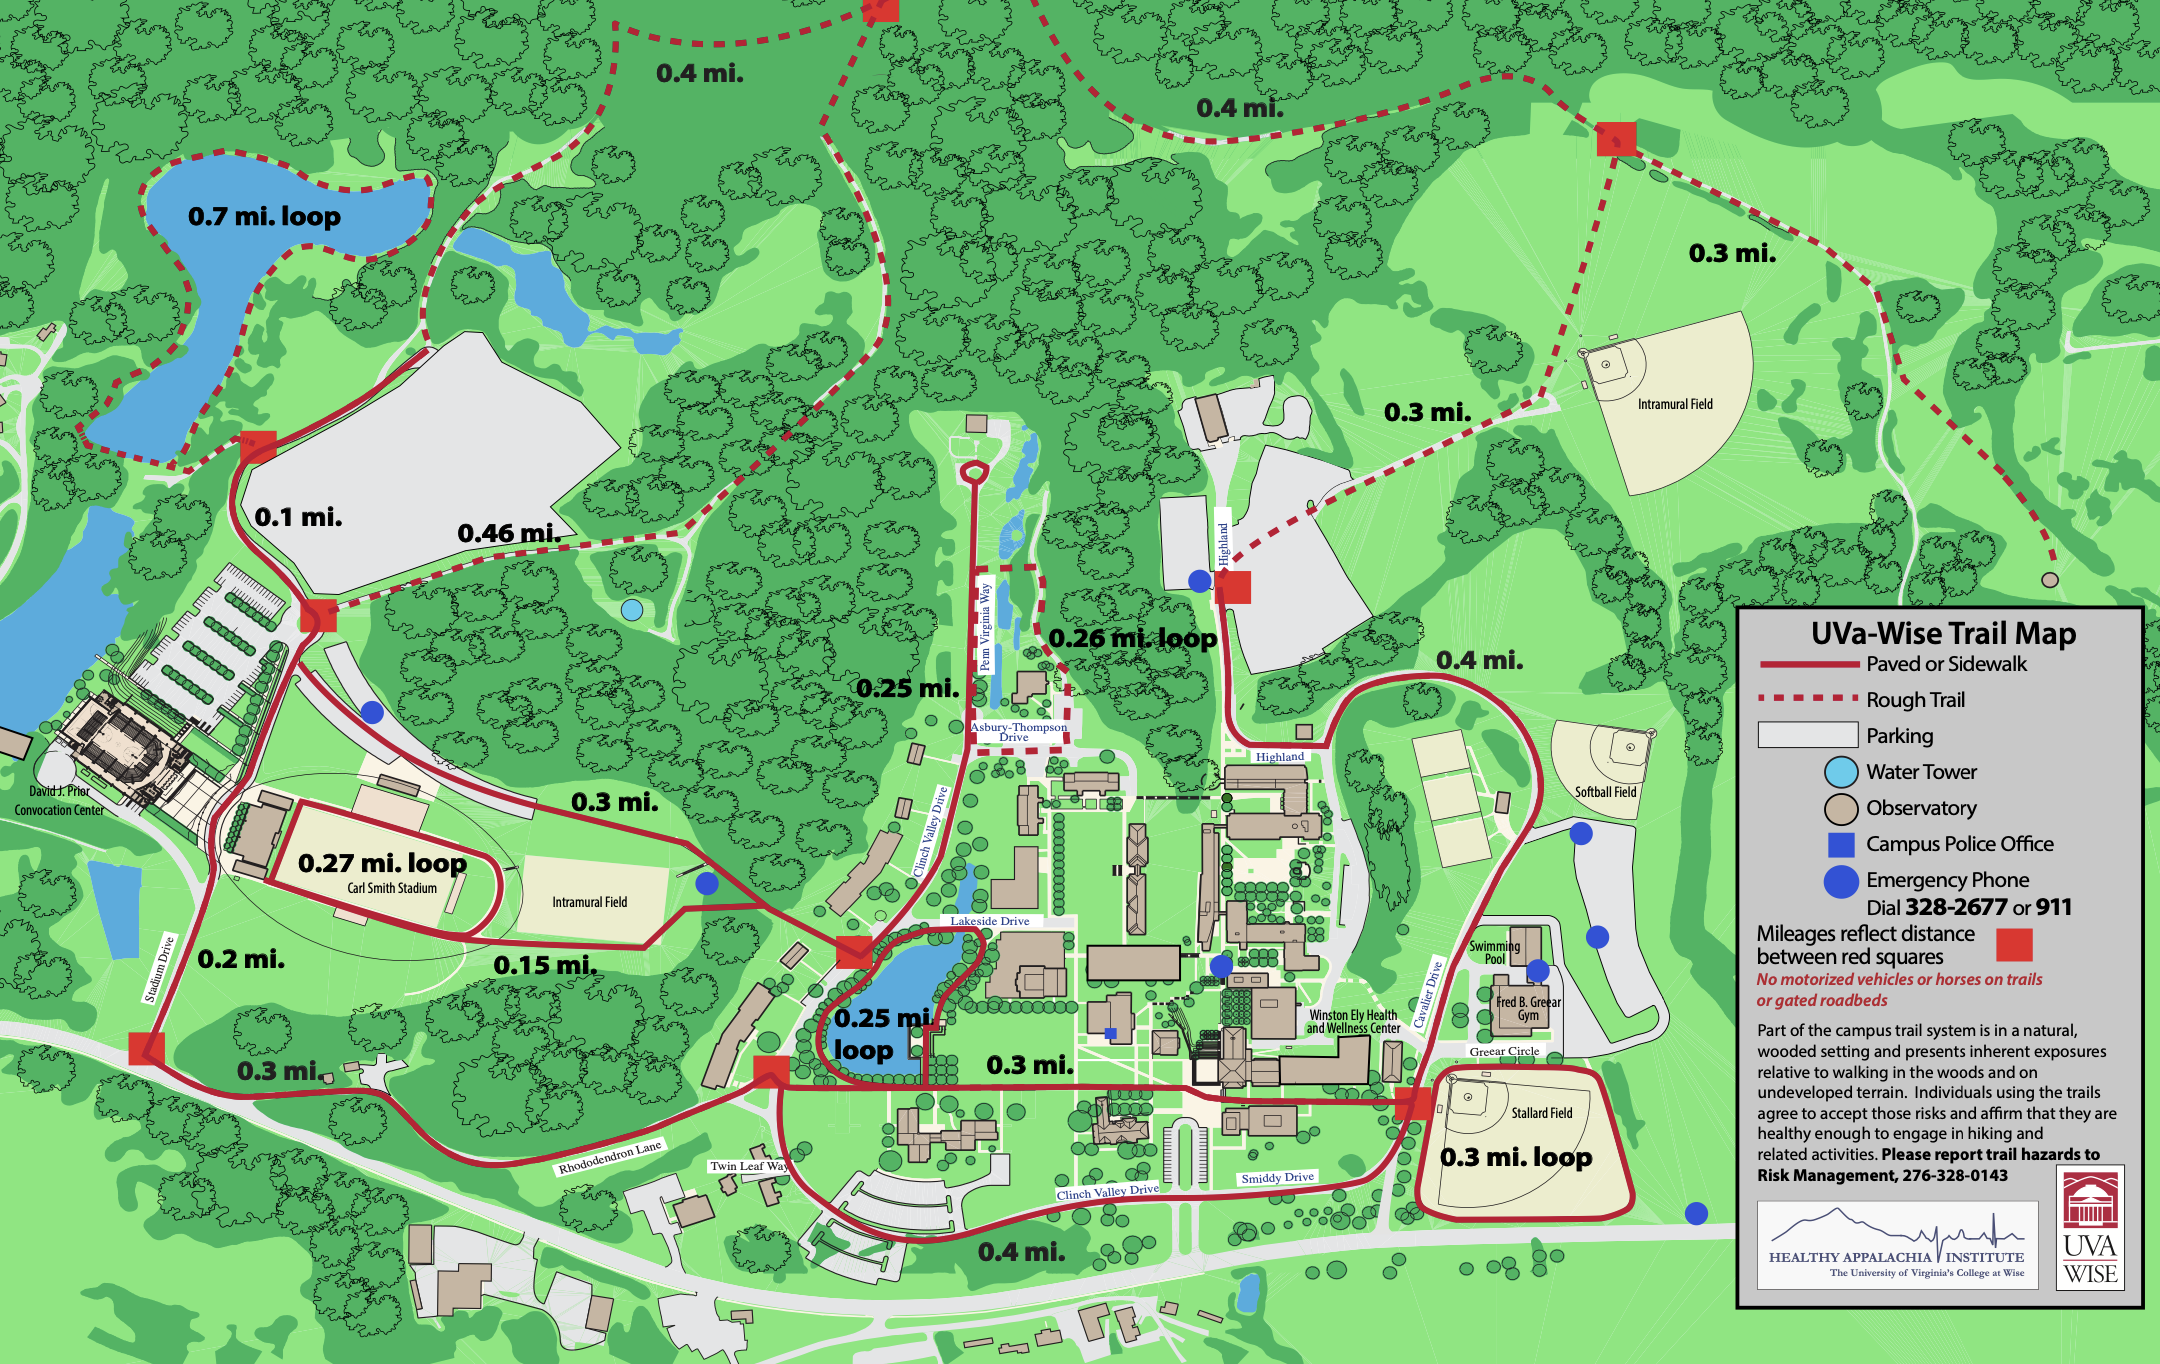 UVa-Wise trail map